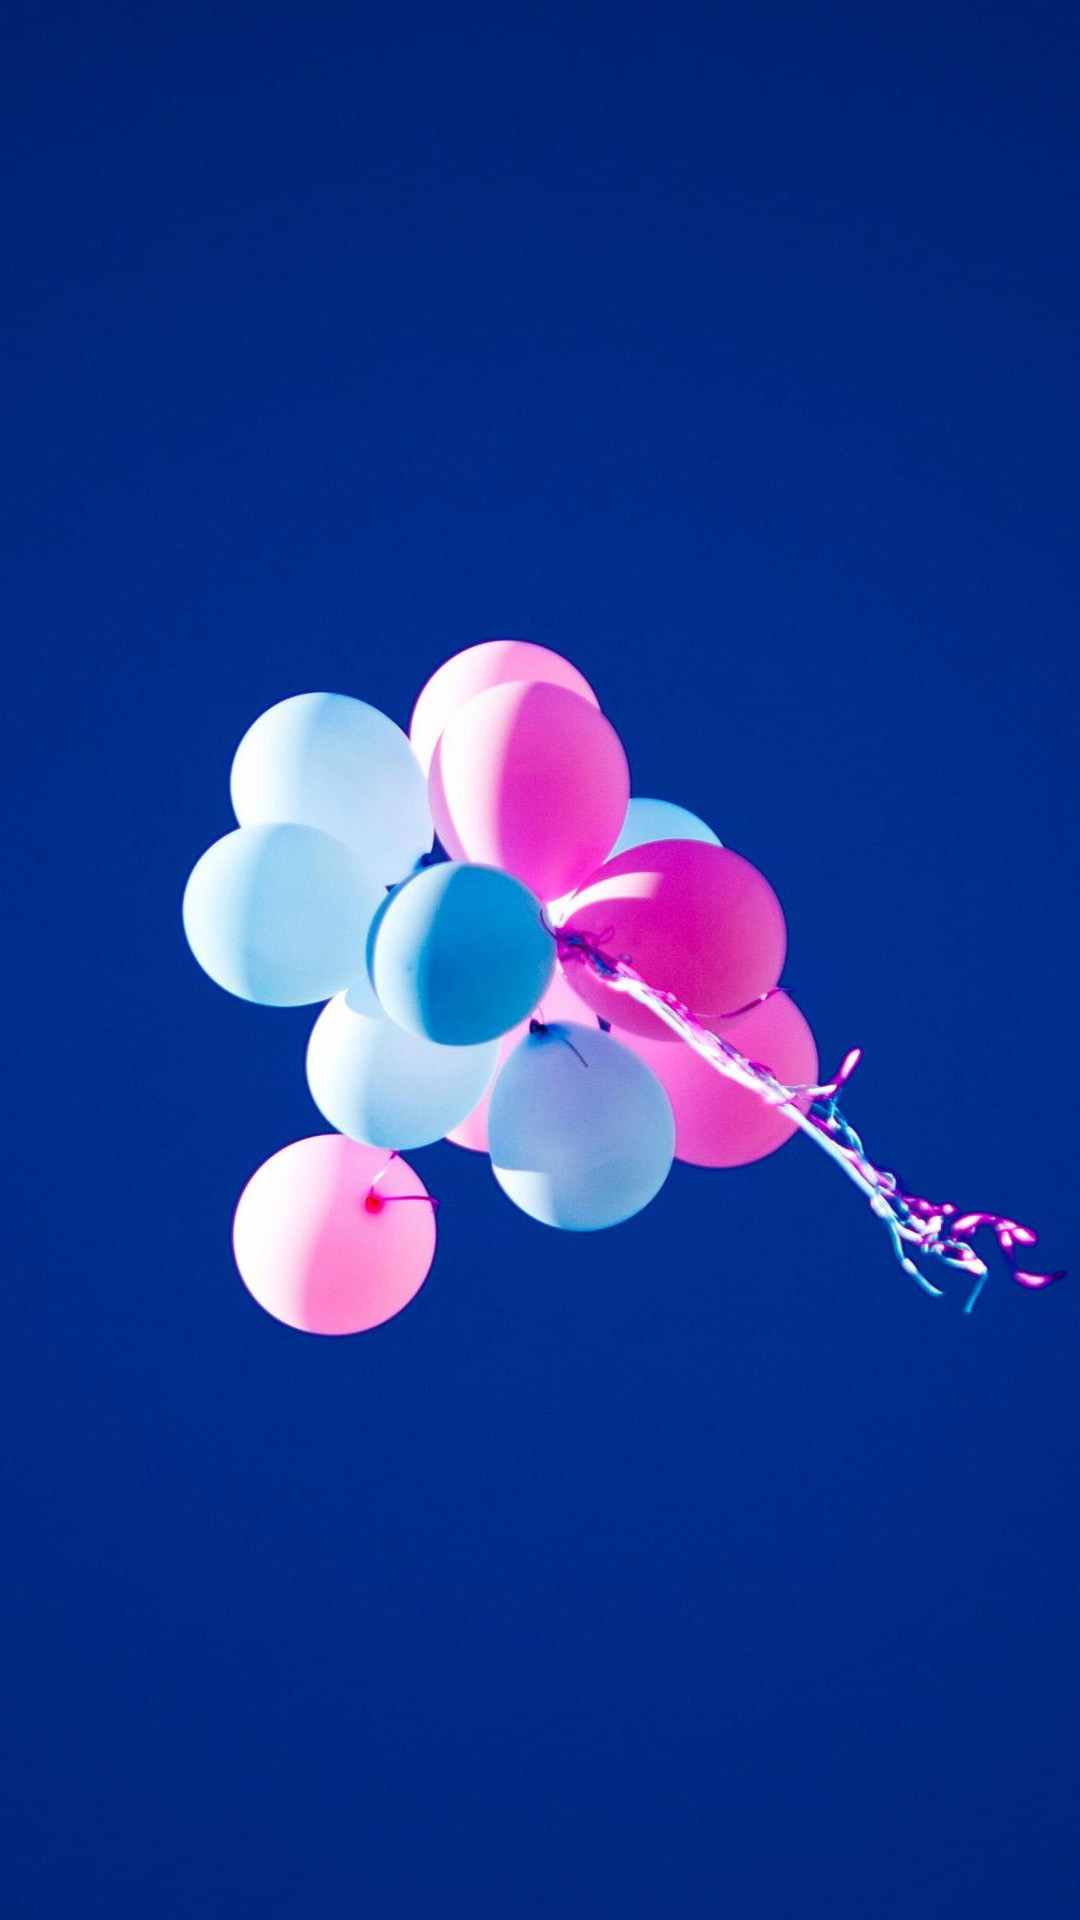 1080x1920 HD Balloons Blue Sky Pink Android Wallpaper ...